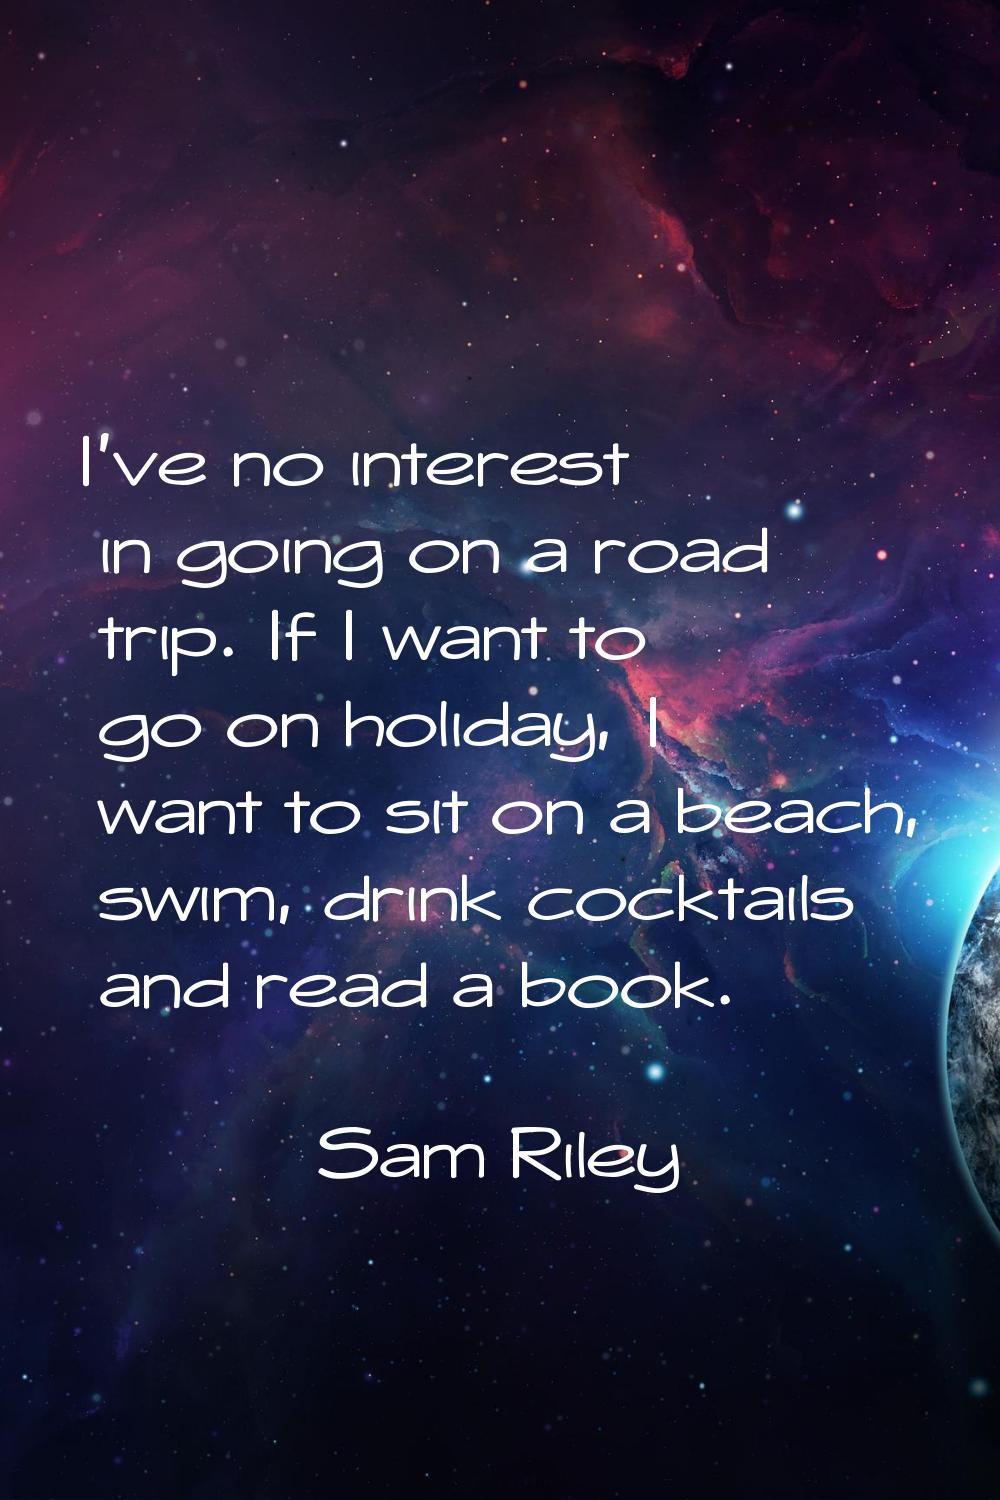 I've no interest in going on a road trip. If I want to go on holiday, I want to sit on a beach, swi